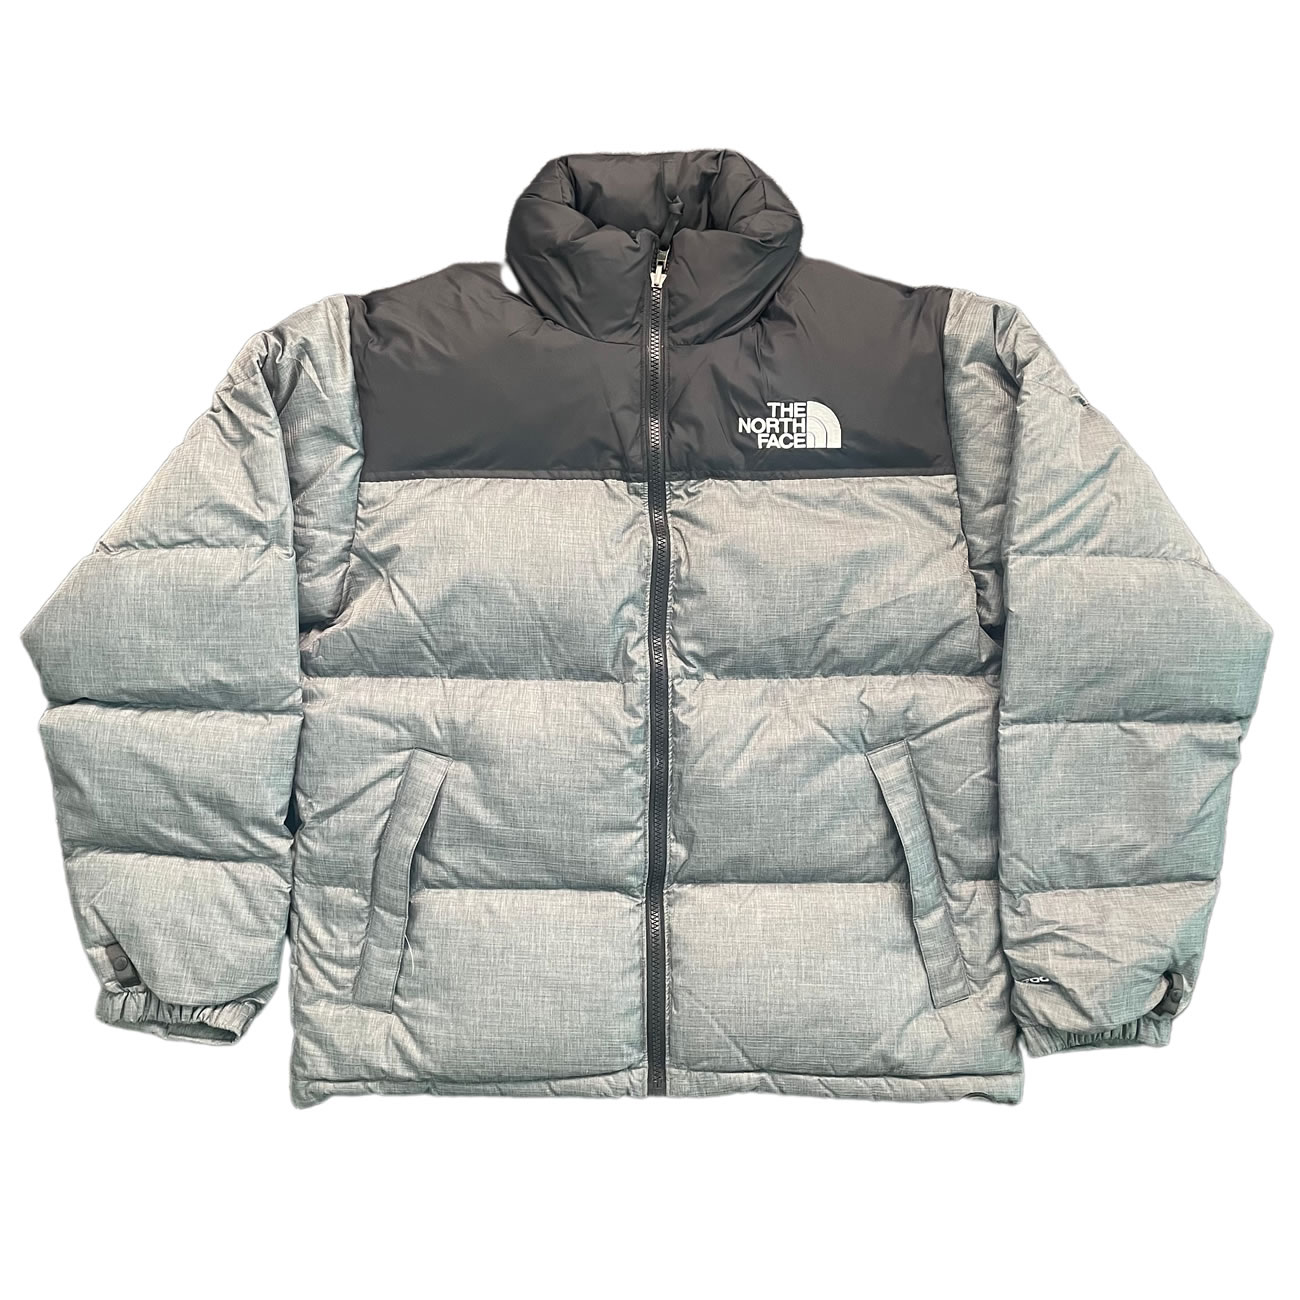 The North Face 1996 Retro Nuptse Packable Jacket Fw21 (18) - newkick.org